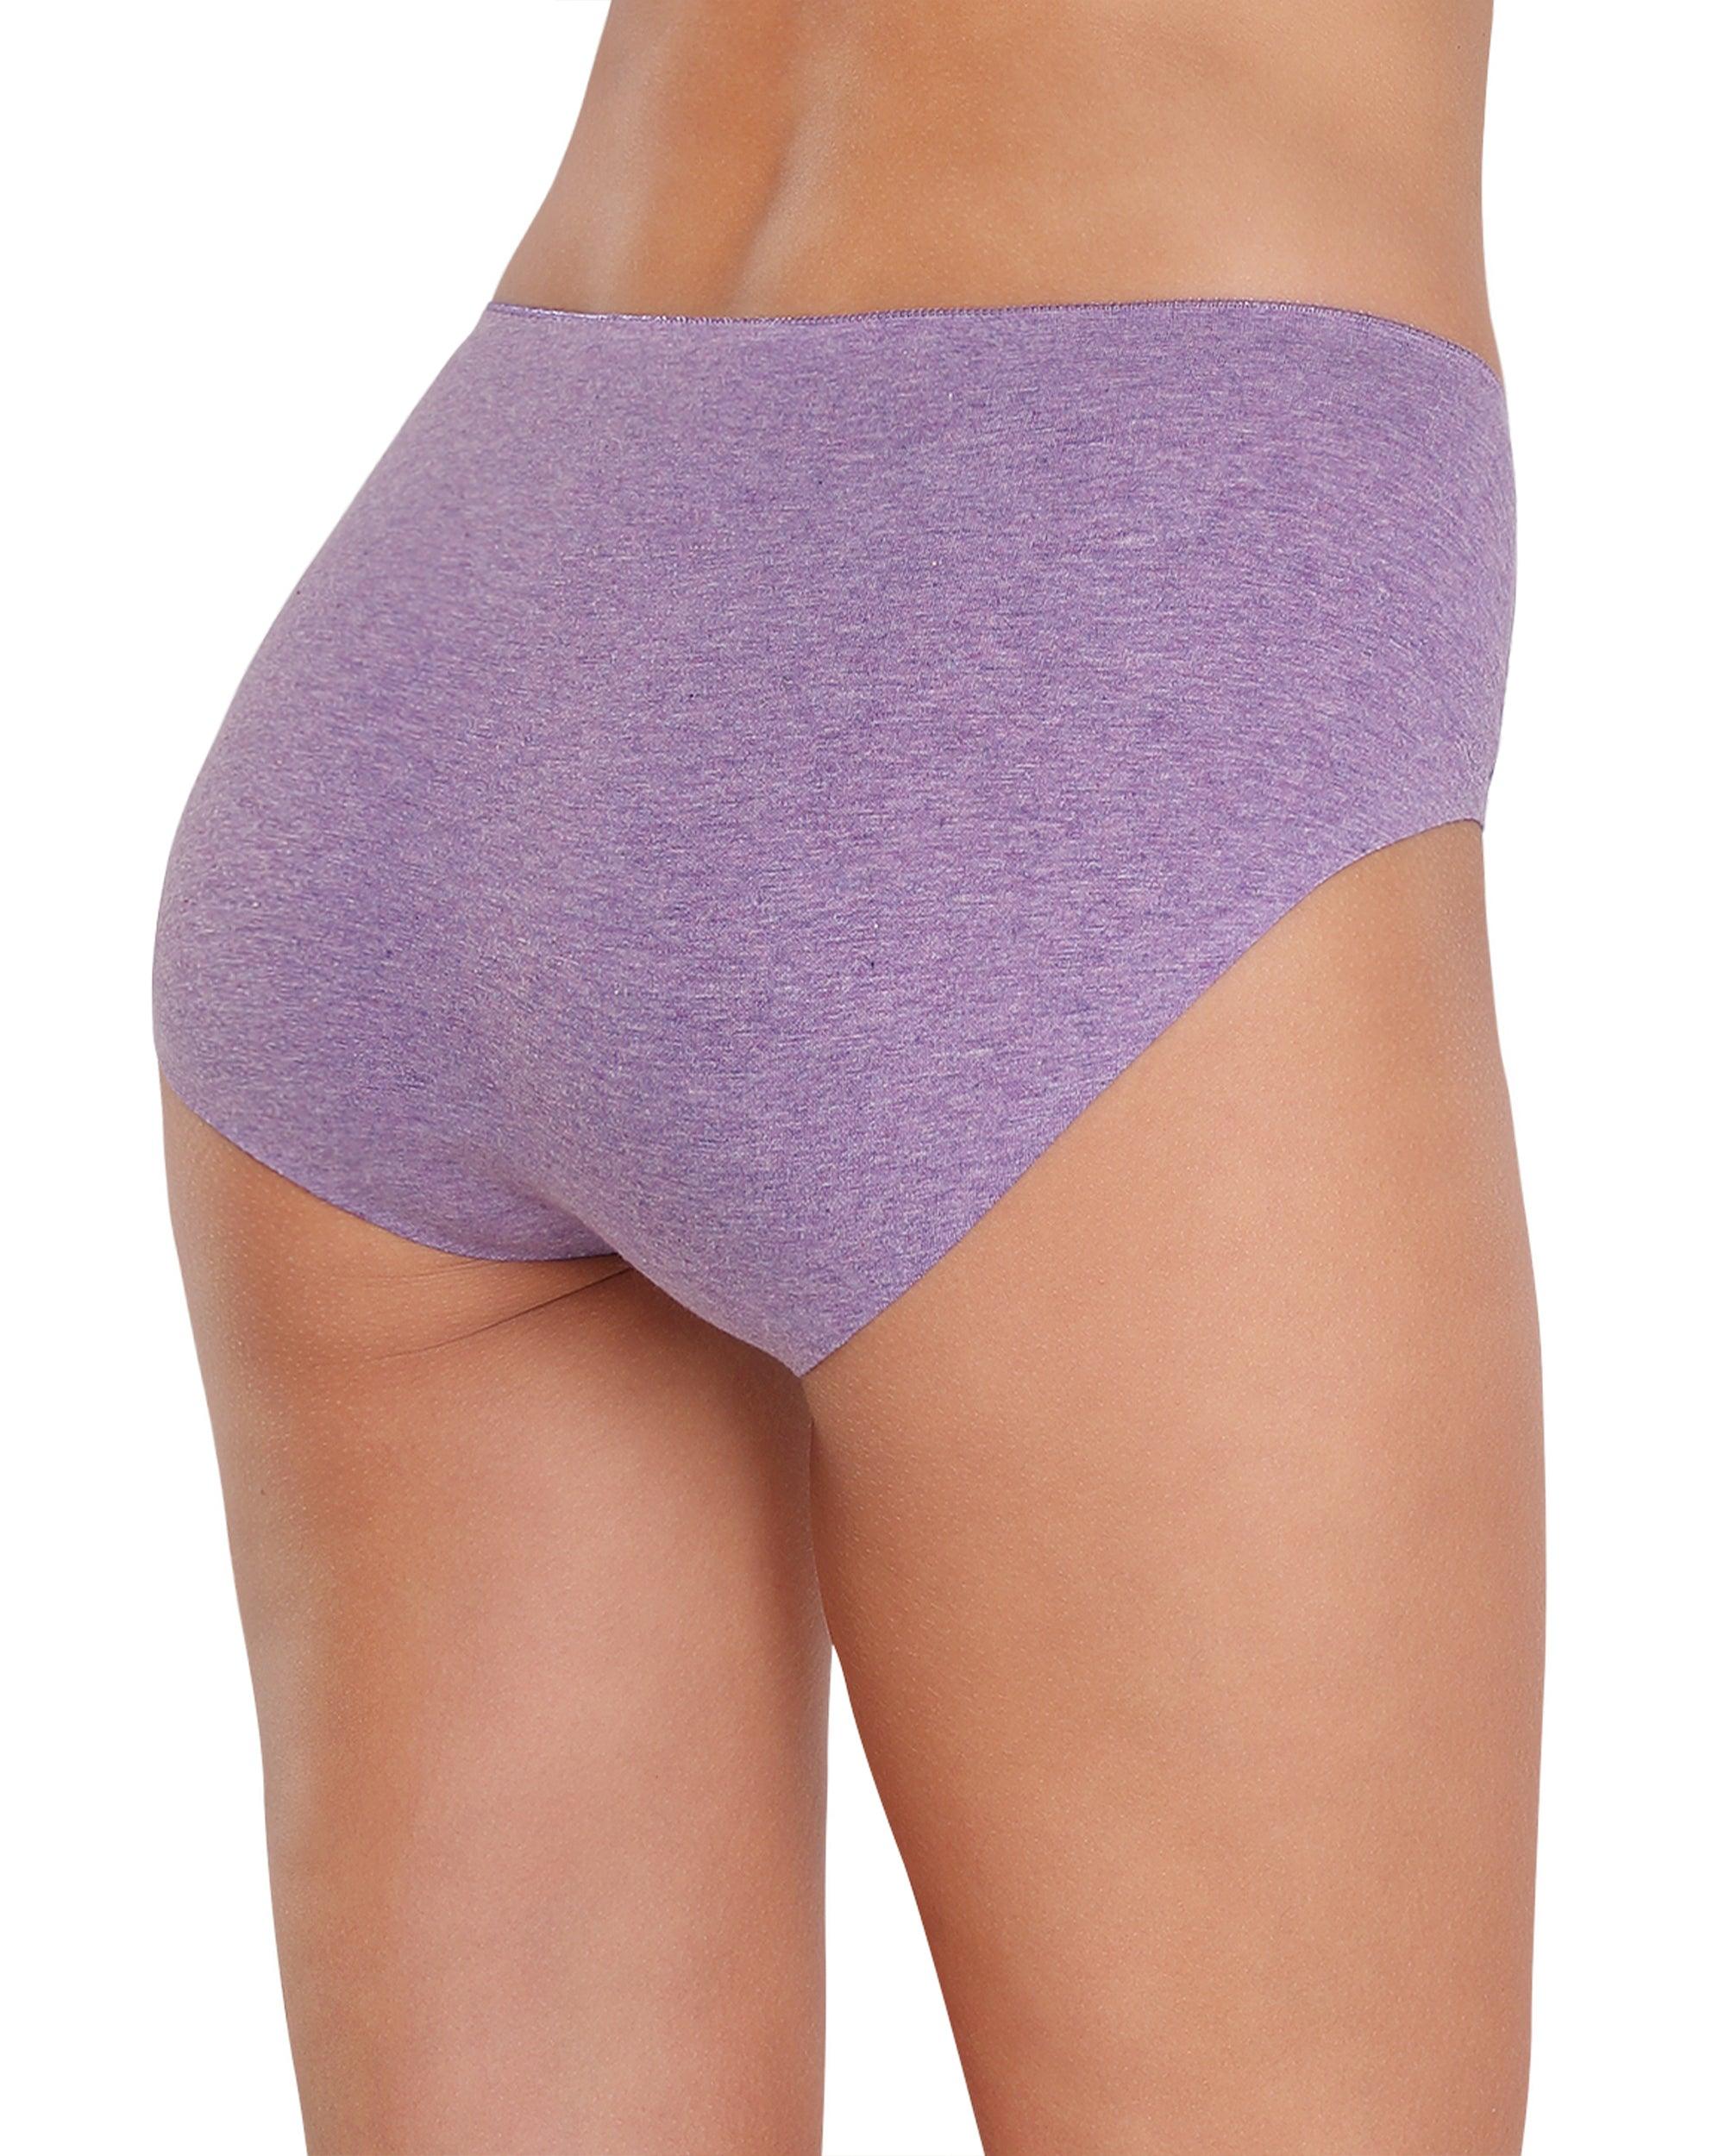 Altheanray Seamless Cotton Briefs Panties for Women 6 Pack – ALTHEANRAY